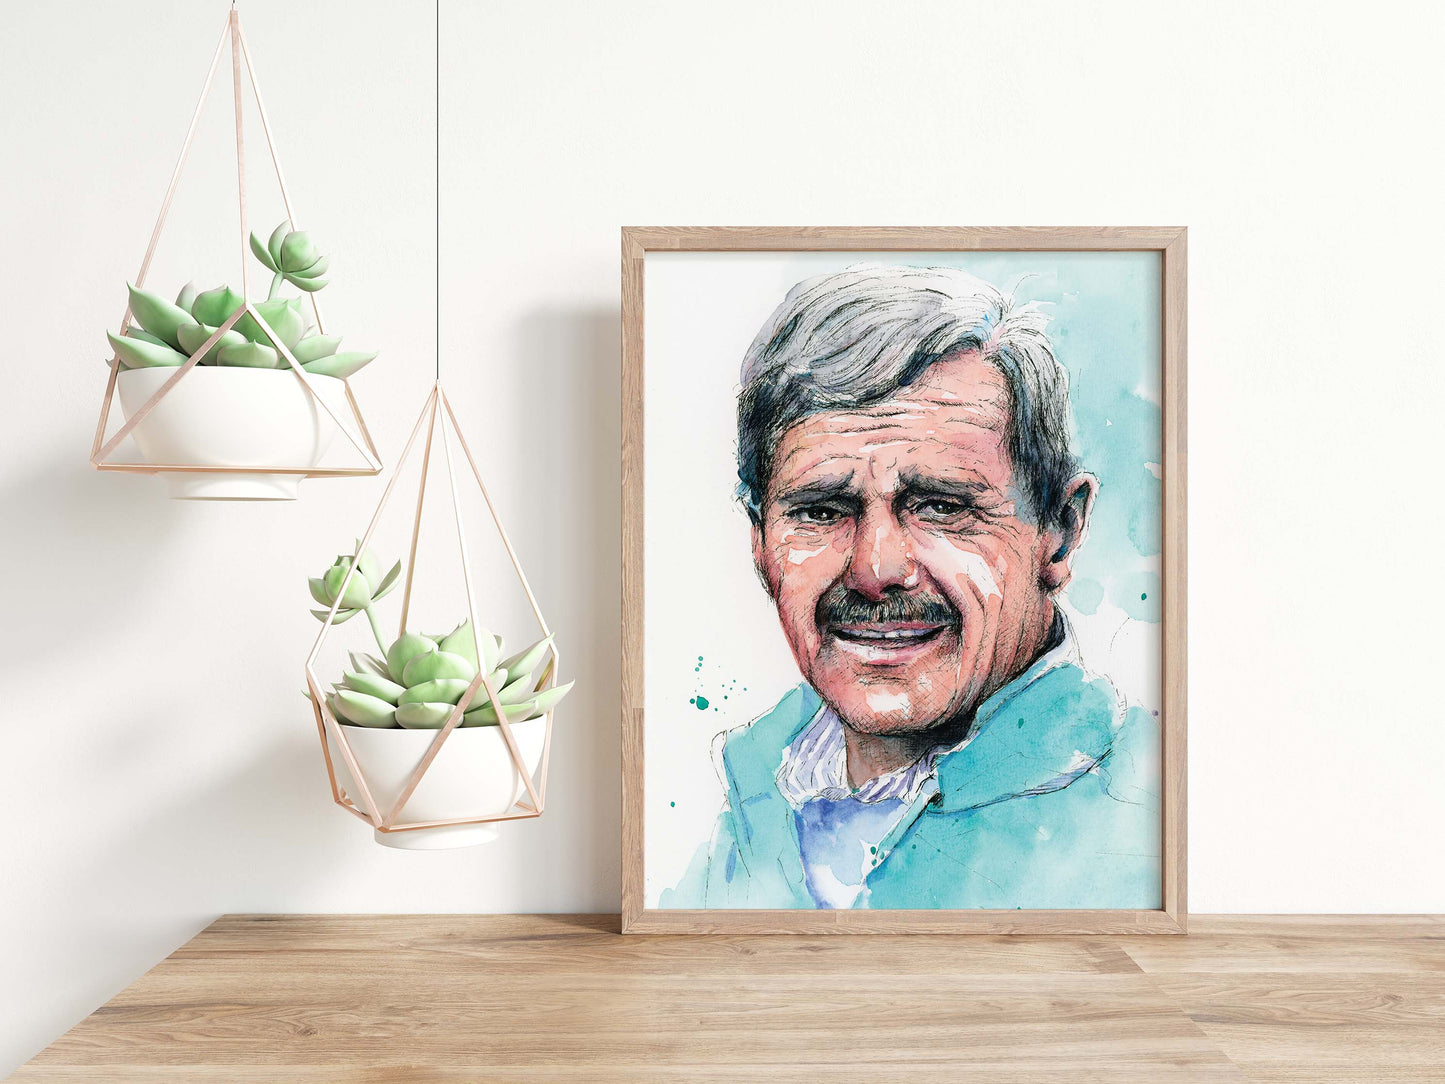 A smiling face portrait poster of a man wearing blue in watercolor